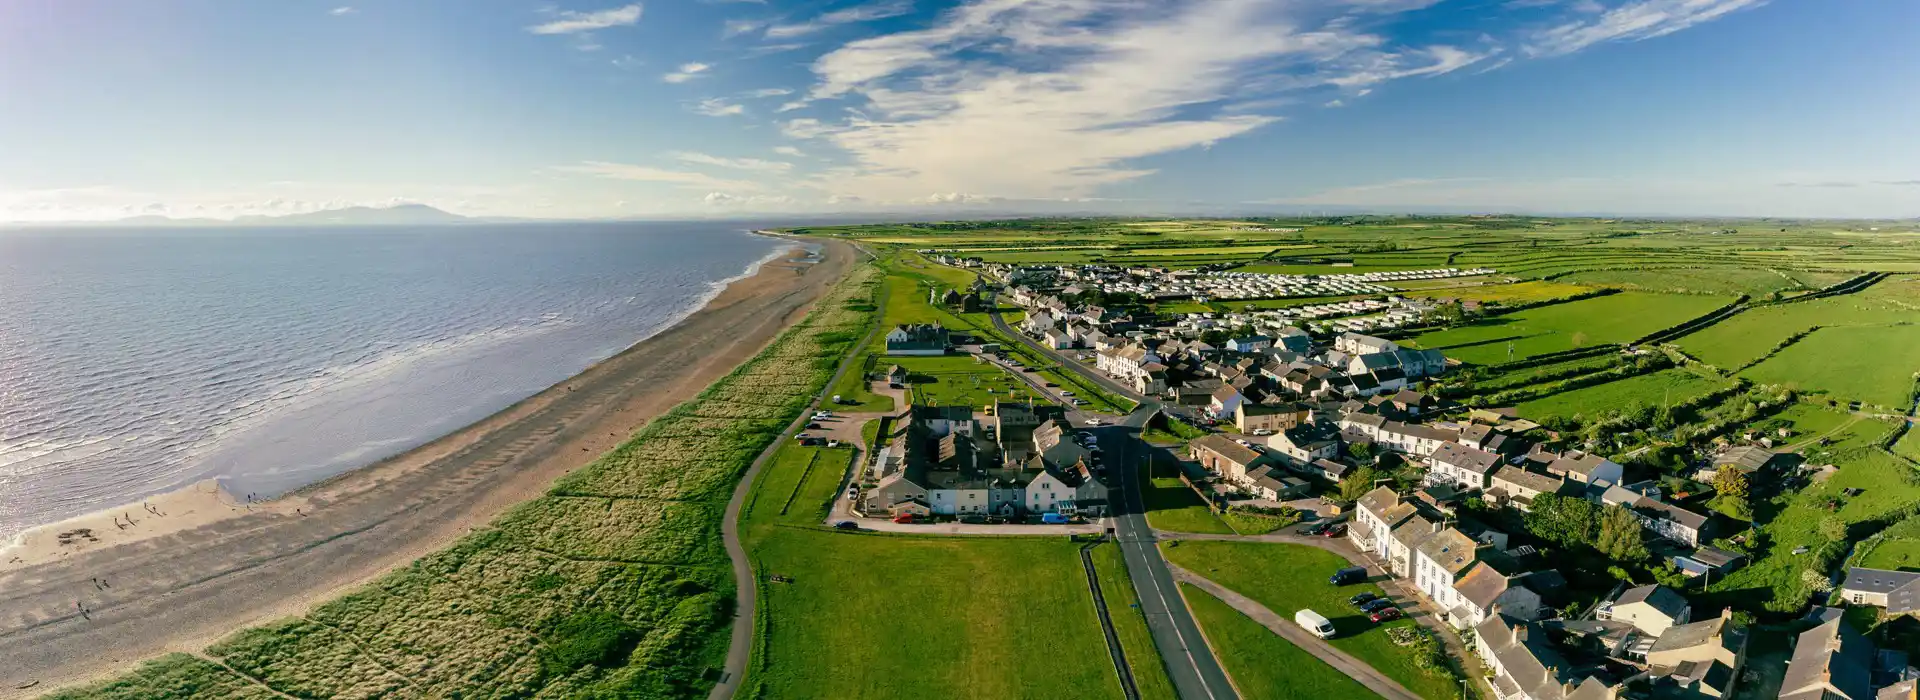 Allonby